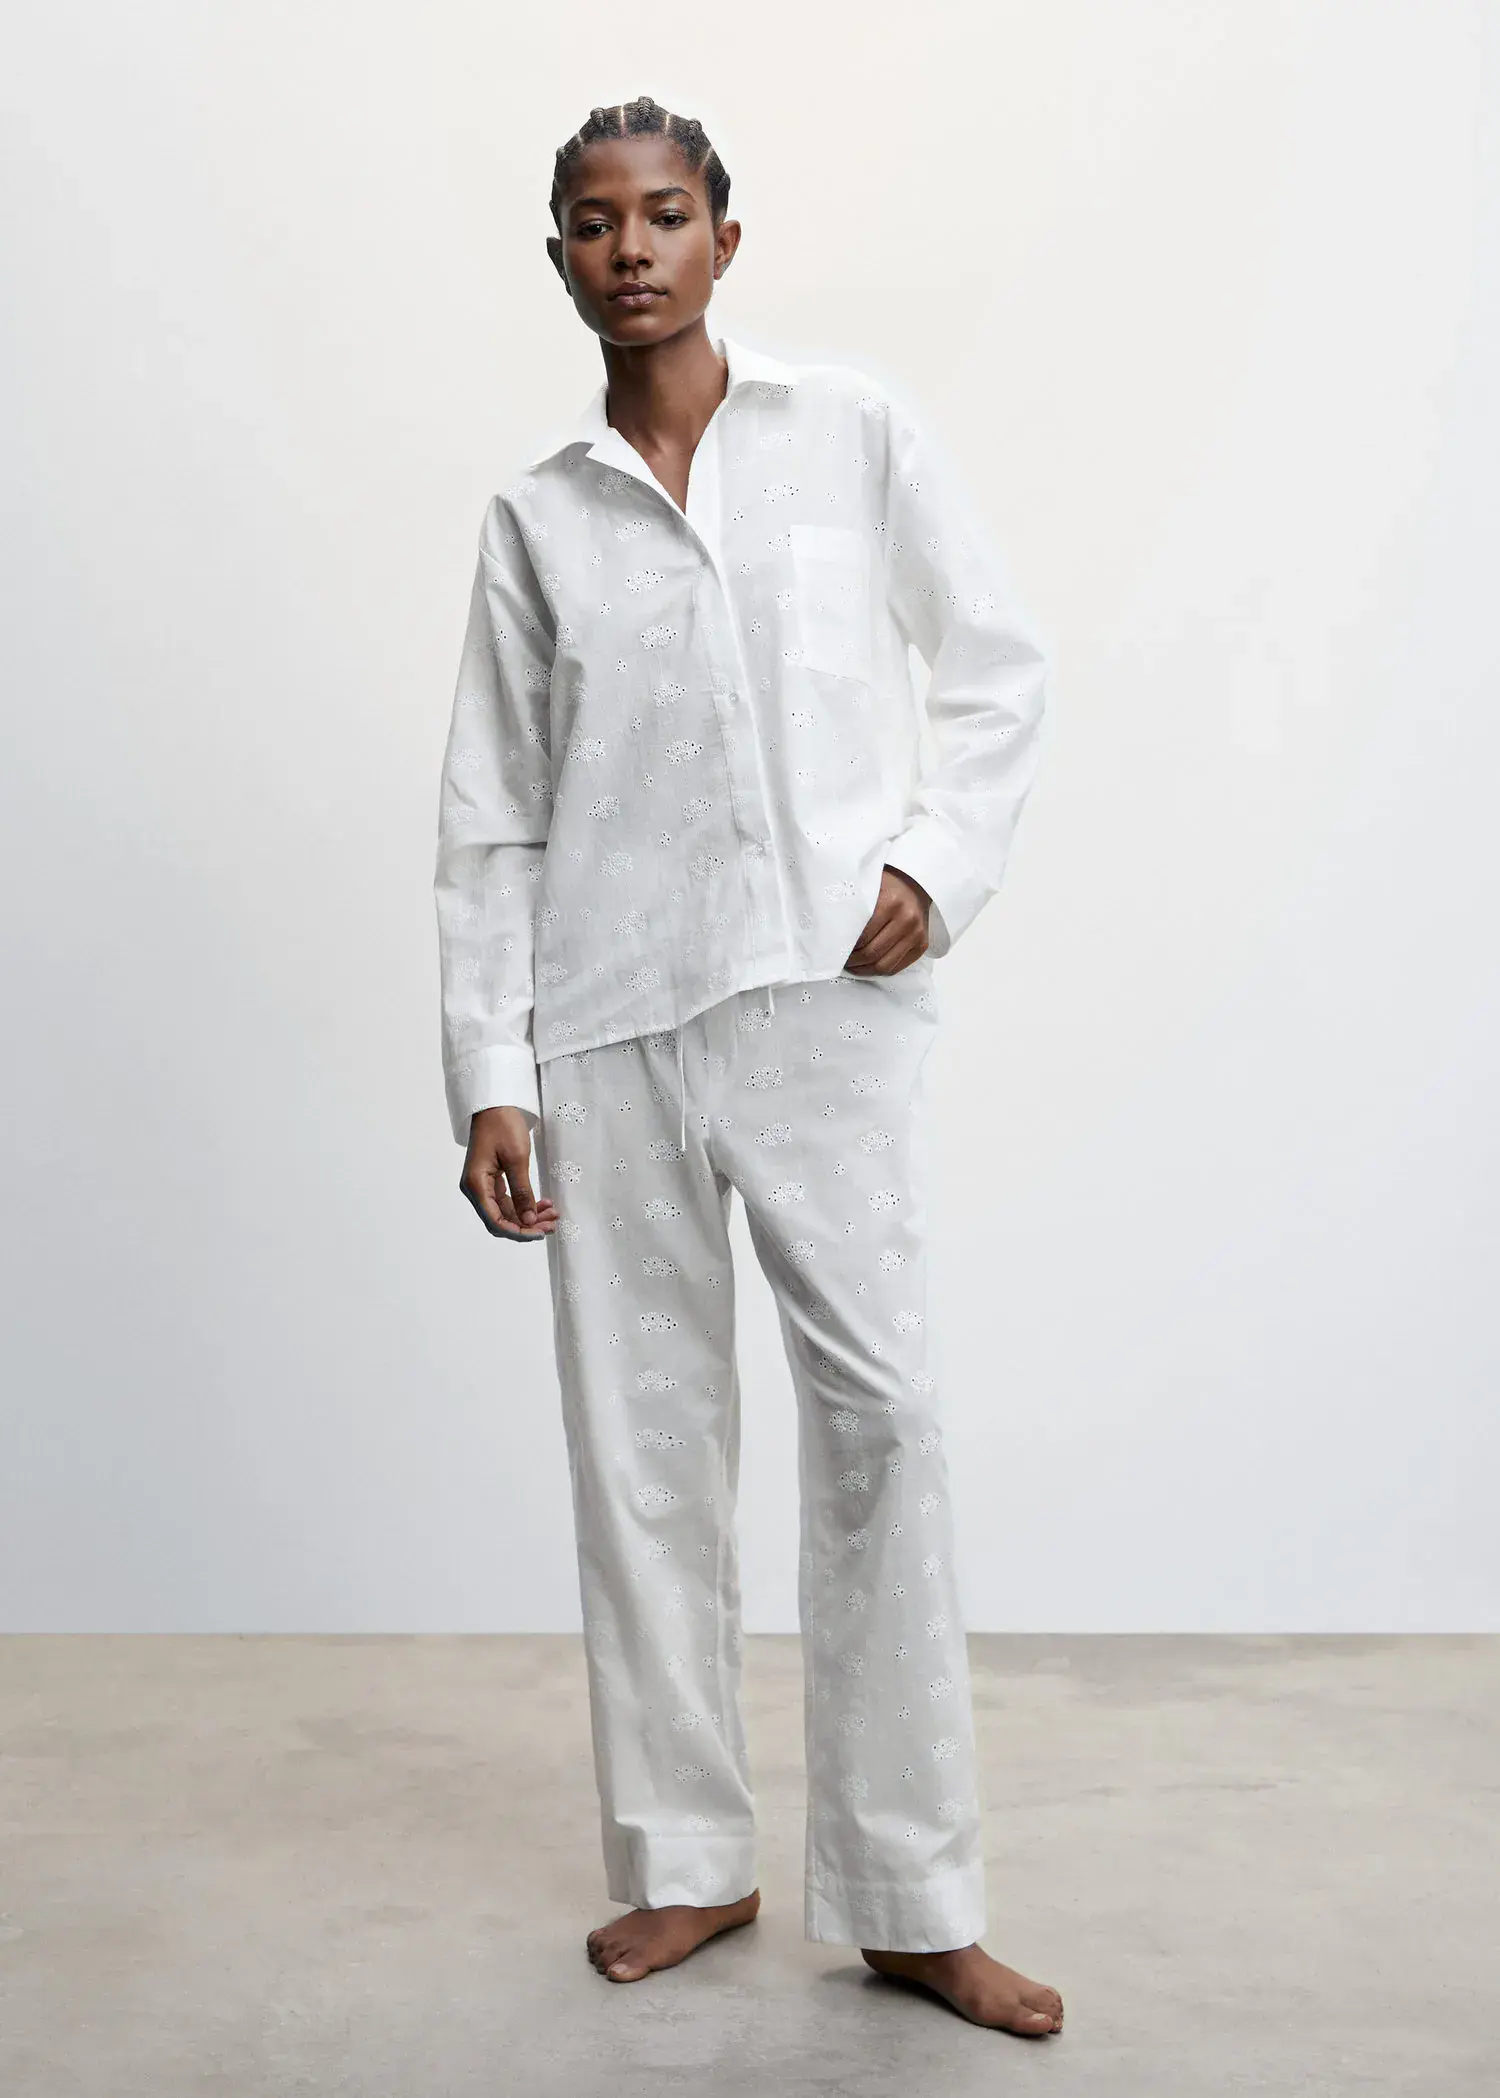 Mango Pajama shirt with openwork details. a man in white shirt and pants standing next to a wall. 